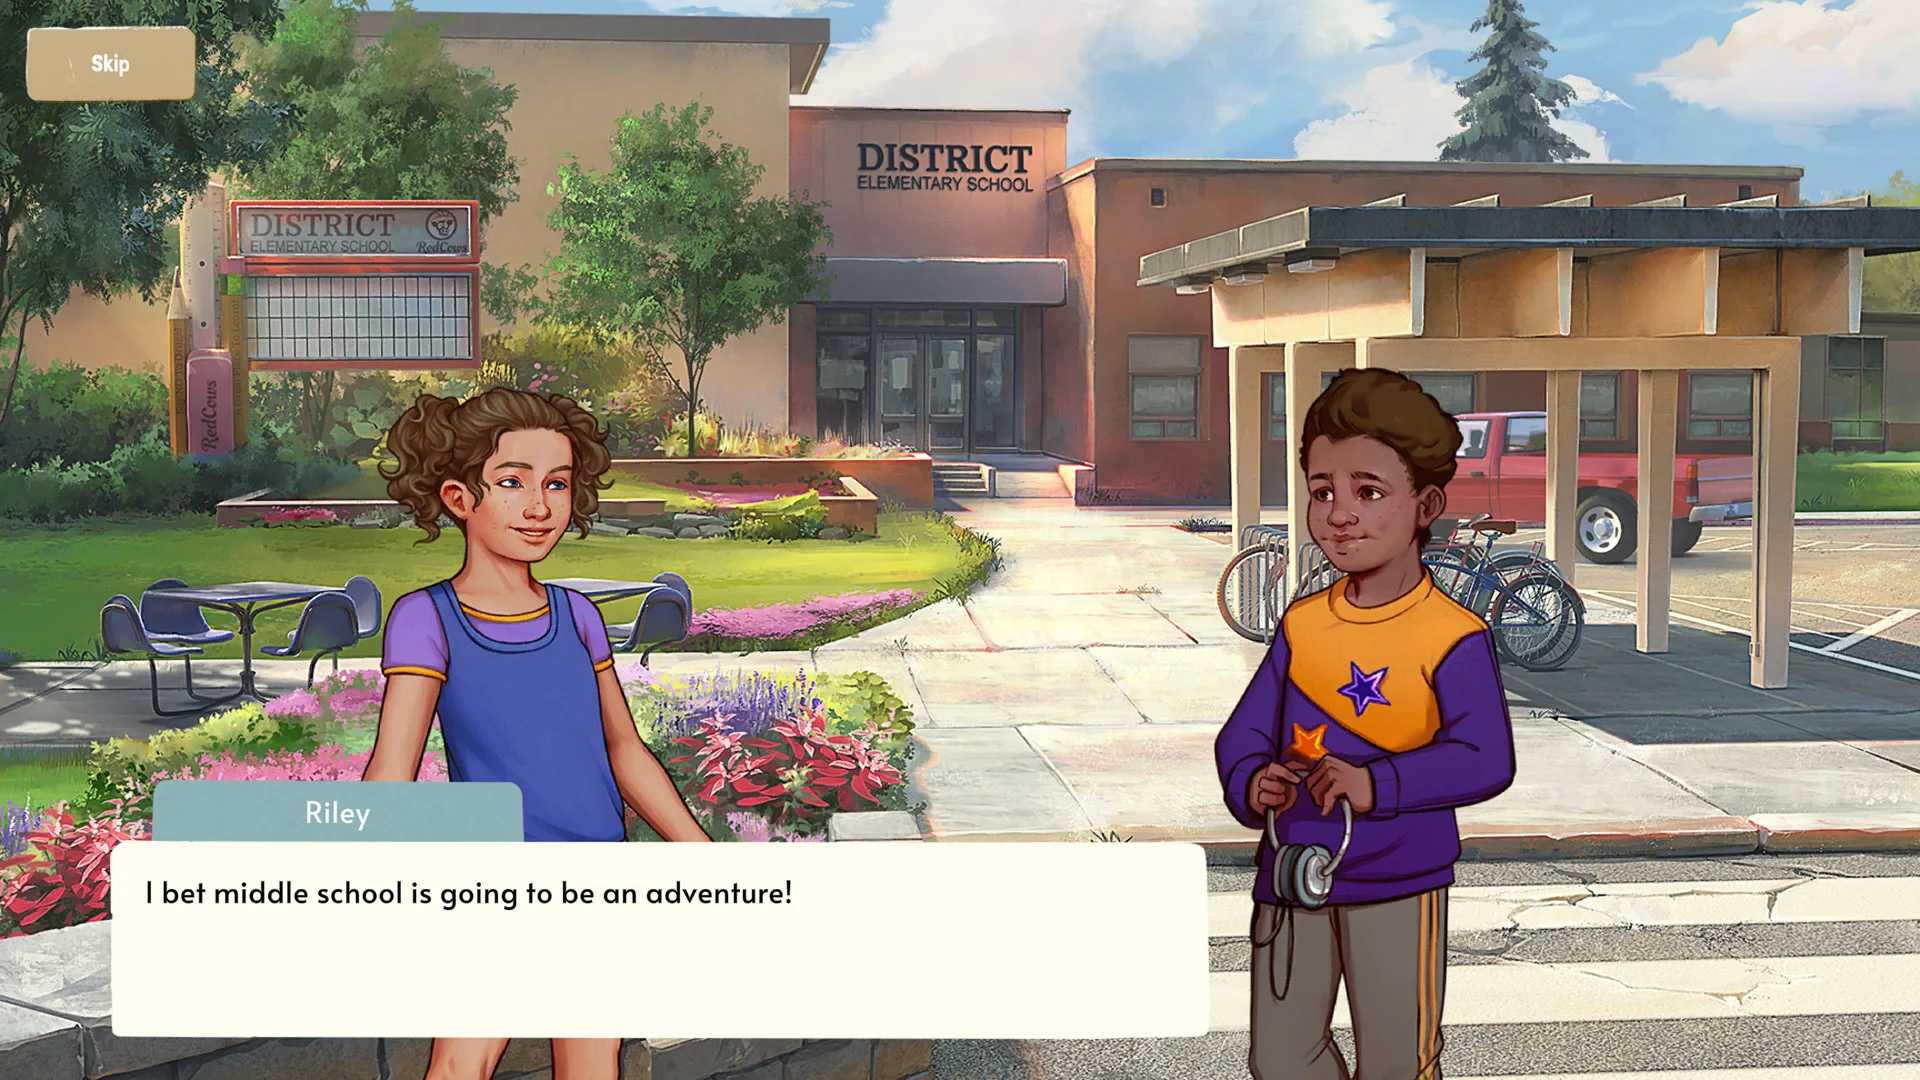 Growing Up, a life simulation game set in the 90s, receives Android release